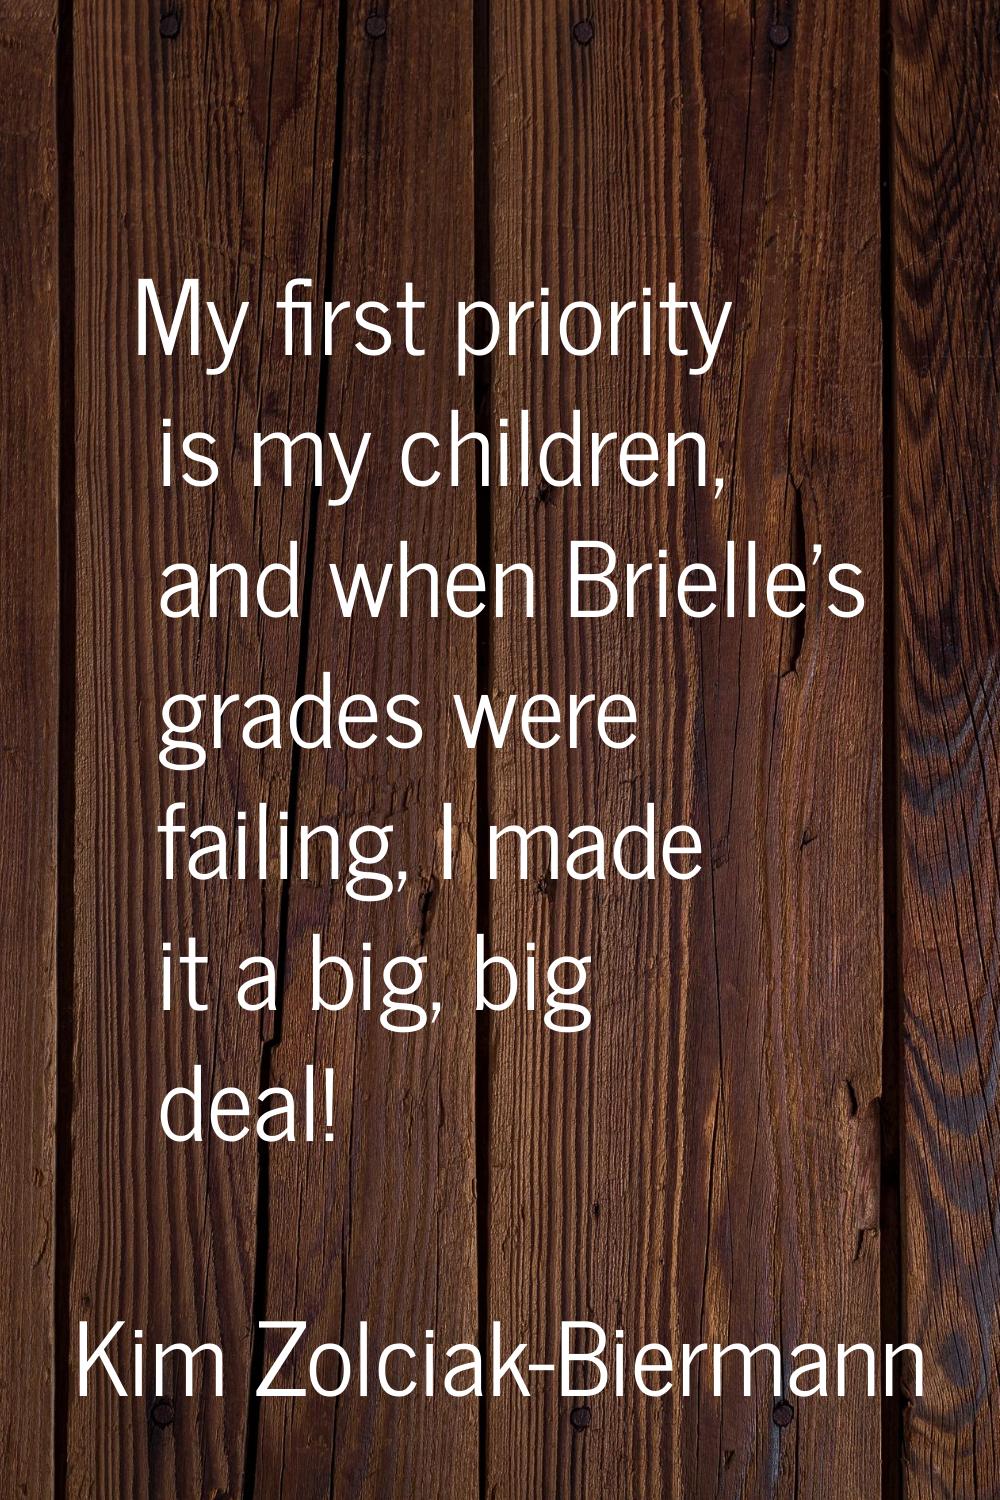 My first priority is my children, and when Brielle's grades were failing, I made it a big, big deal